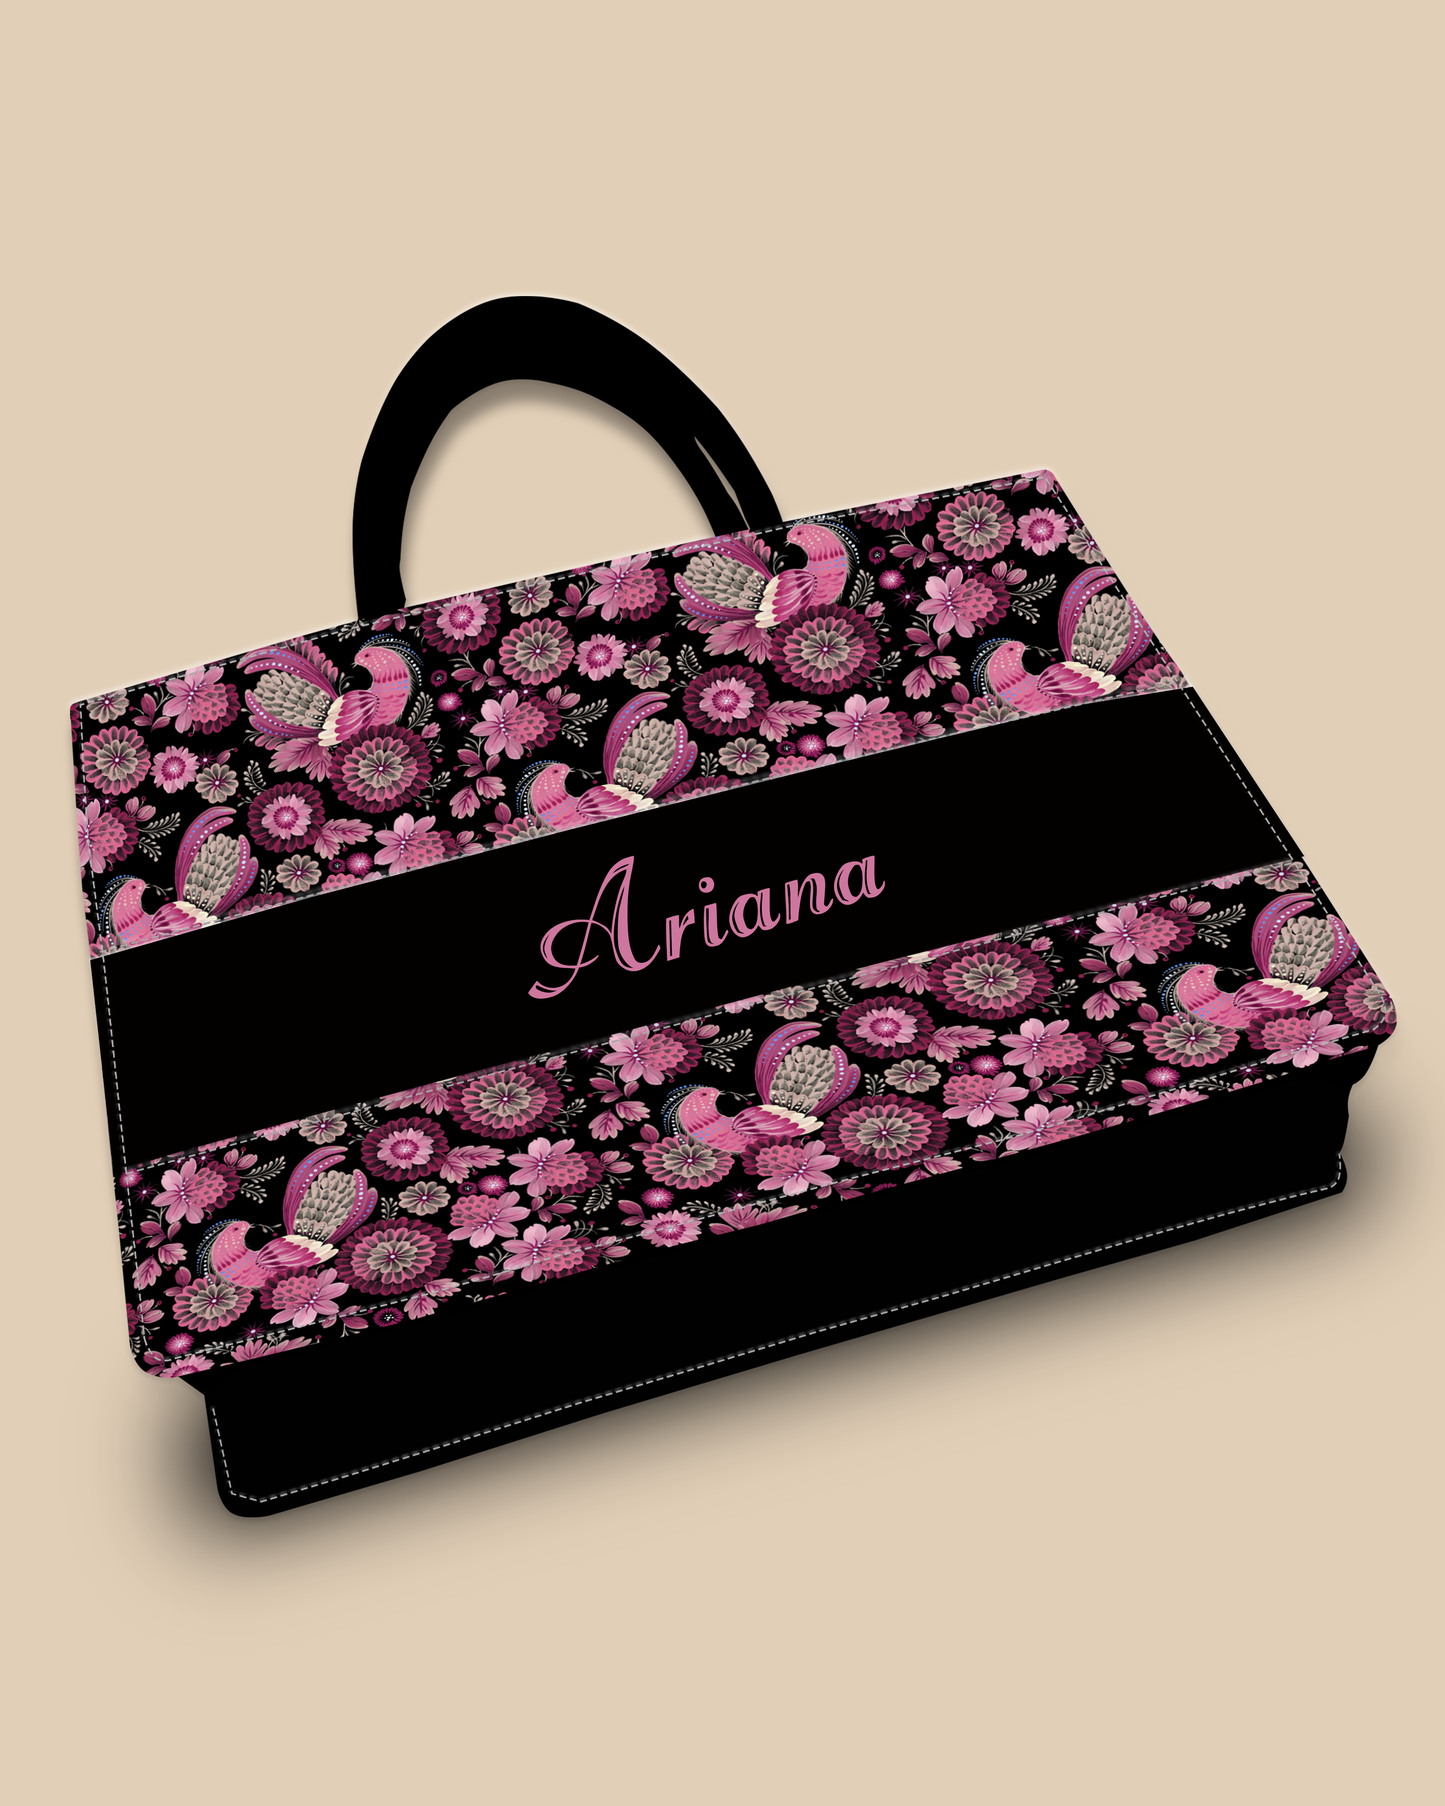 Personalized Tote Bag Designed With Calligraphic Flowers And Peacock Pattern